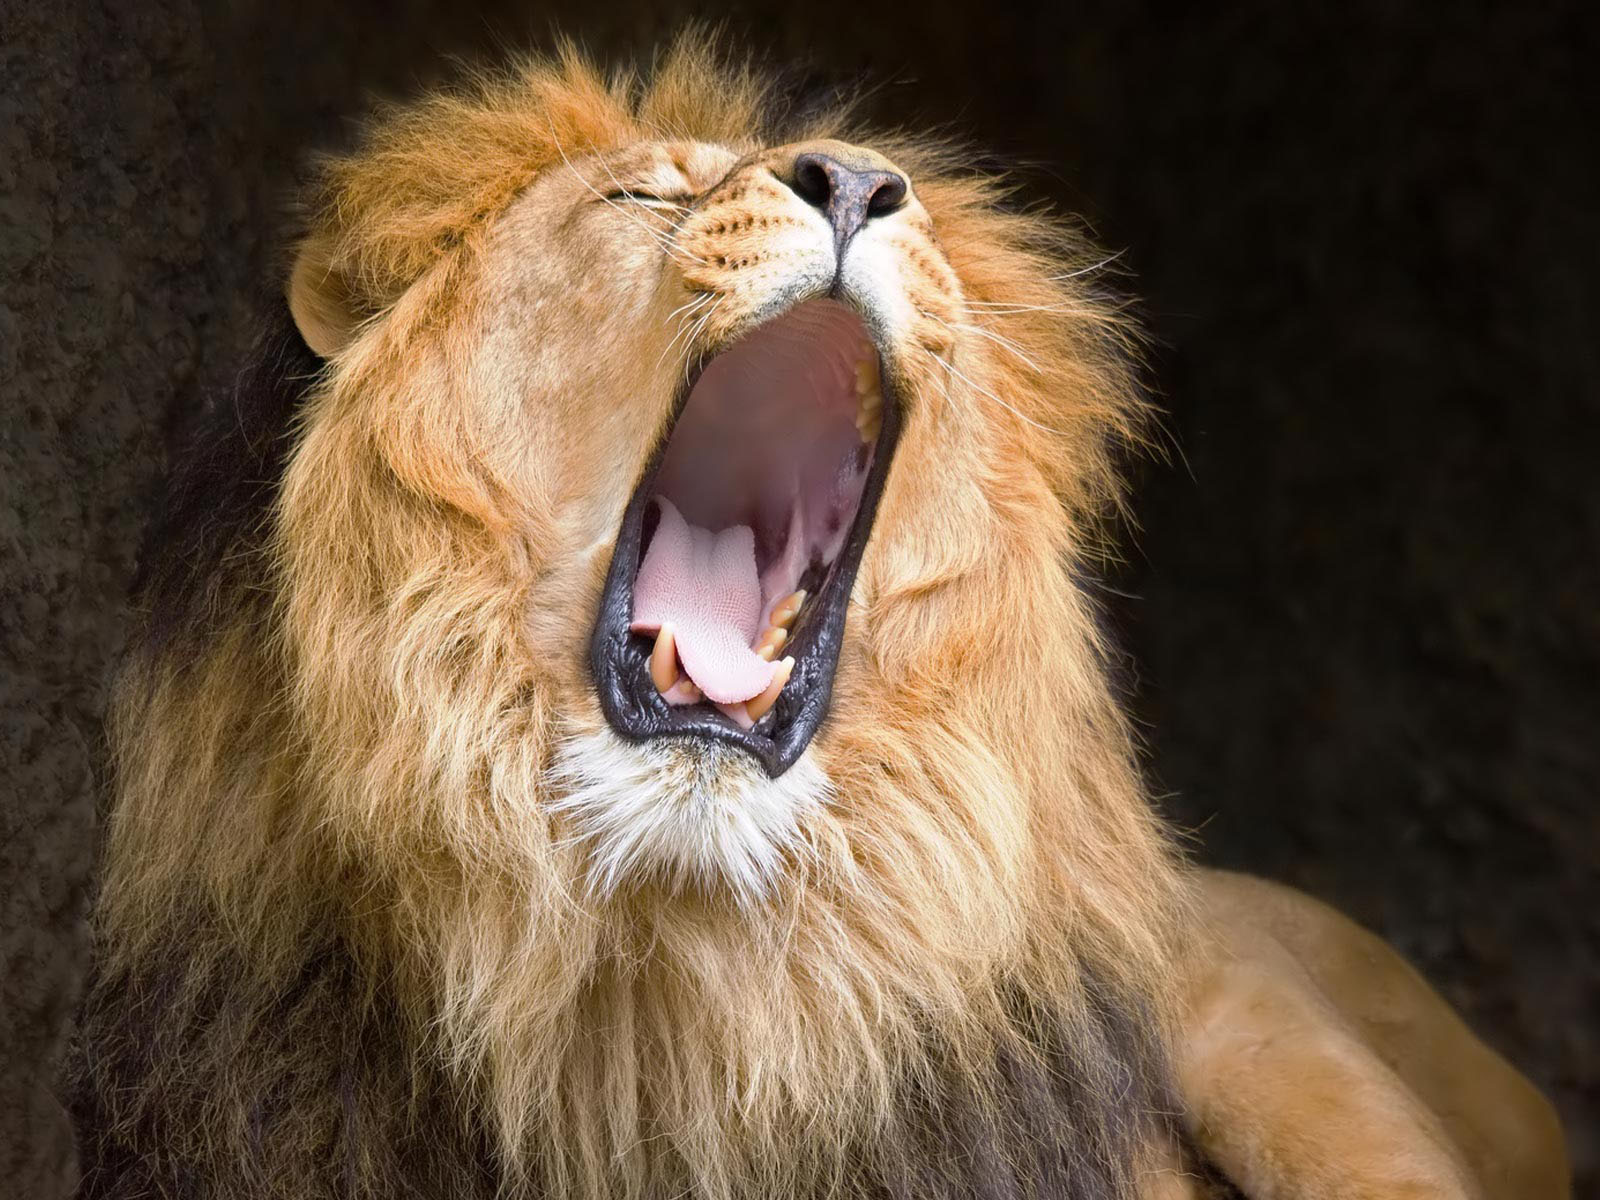 wallpapers Lion Roaring Wallpapers